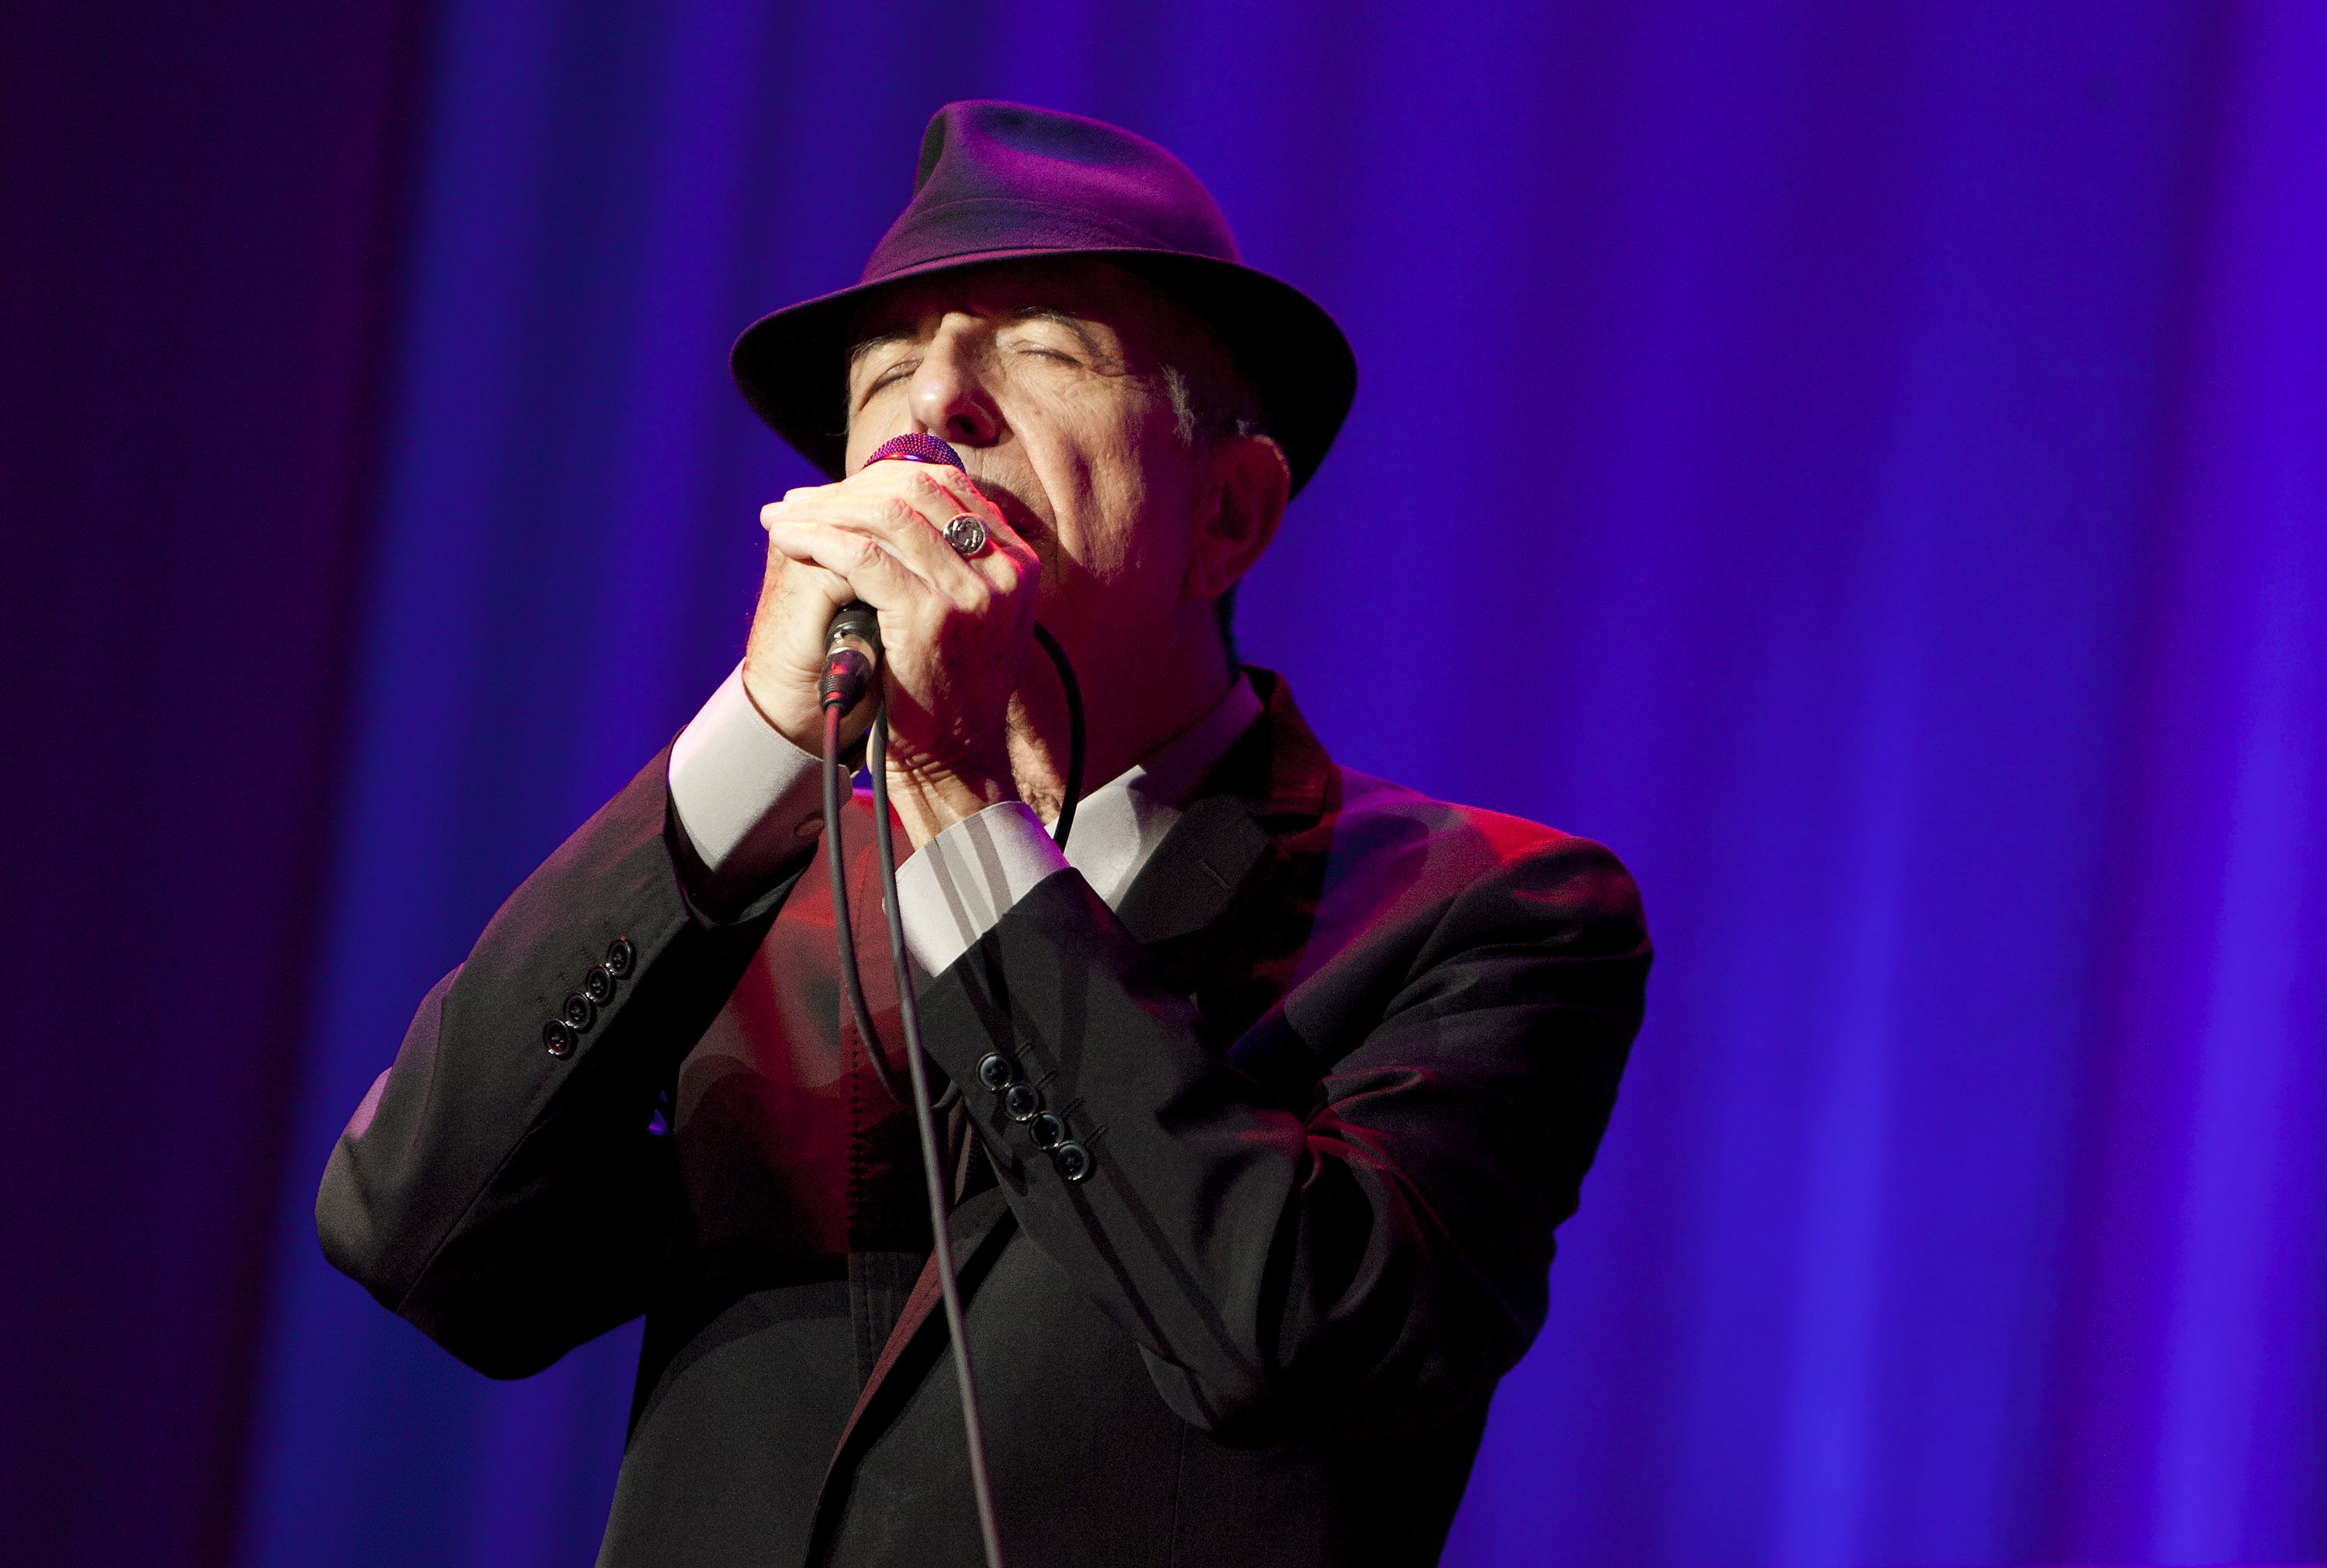 NEW YORK, NY - DECEMBER 18: Musician Leonard Cohen performs at Madison Square Garden on December 18, 2012 in New York City. (Photo by Mike Lawrie/Getty Images)